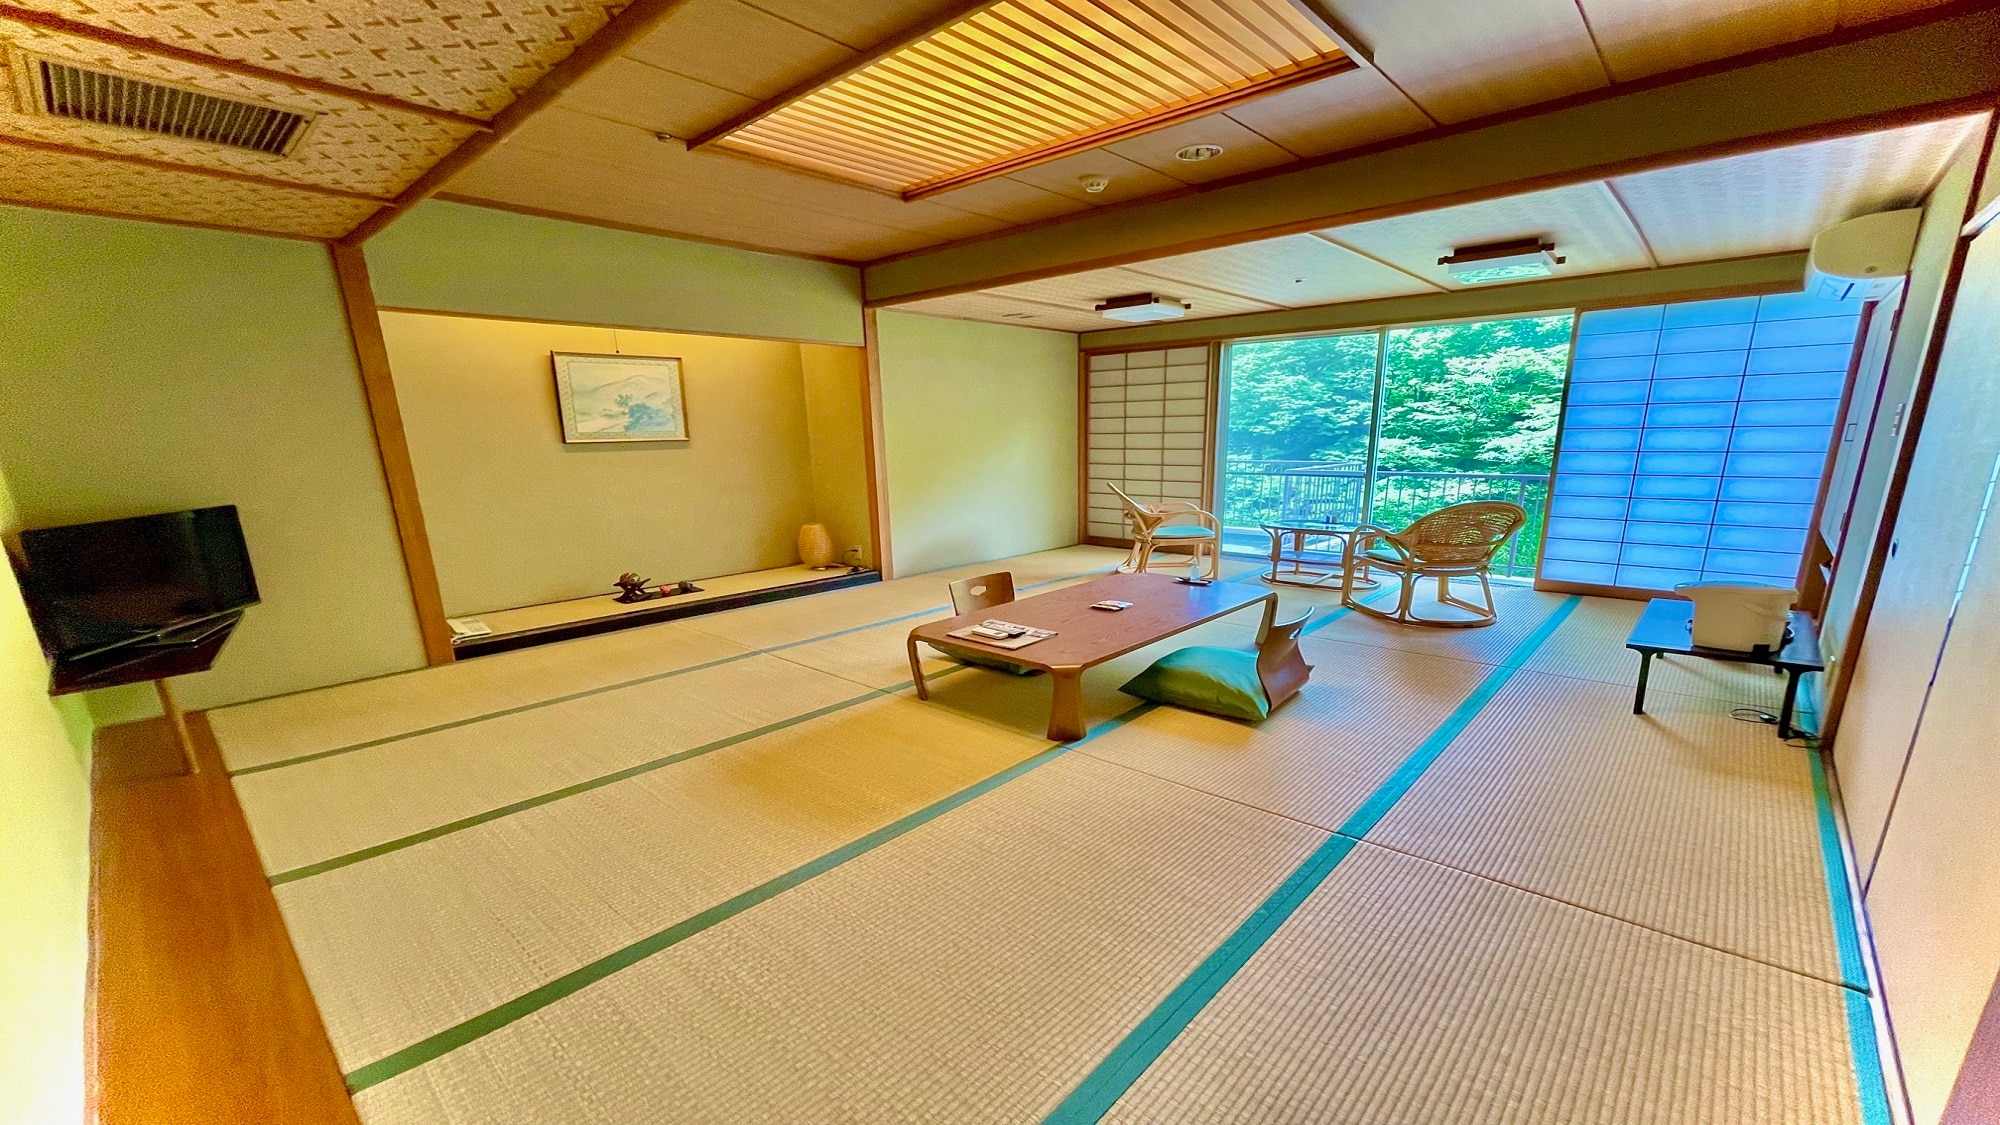 Japanese-style room 15 tatami out bath type